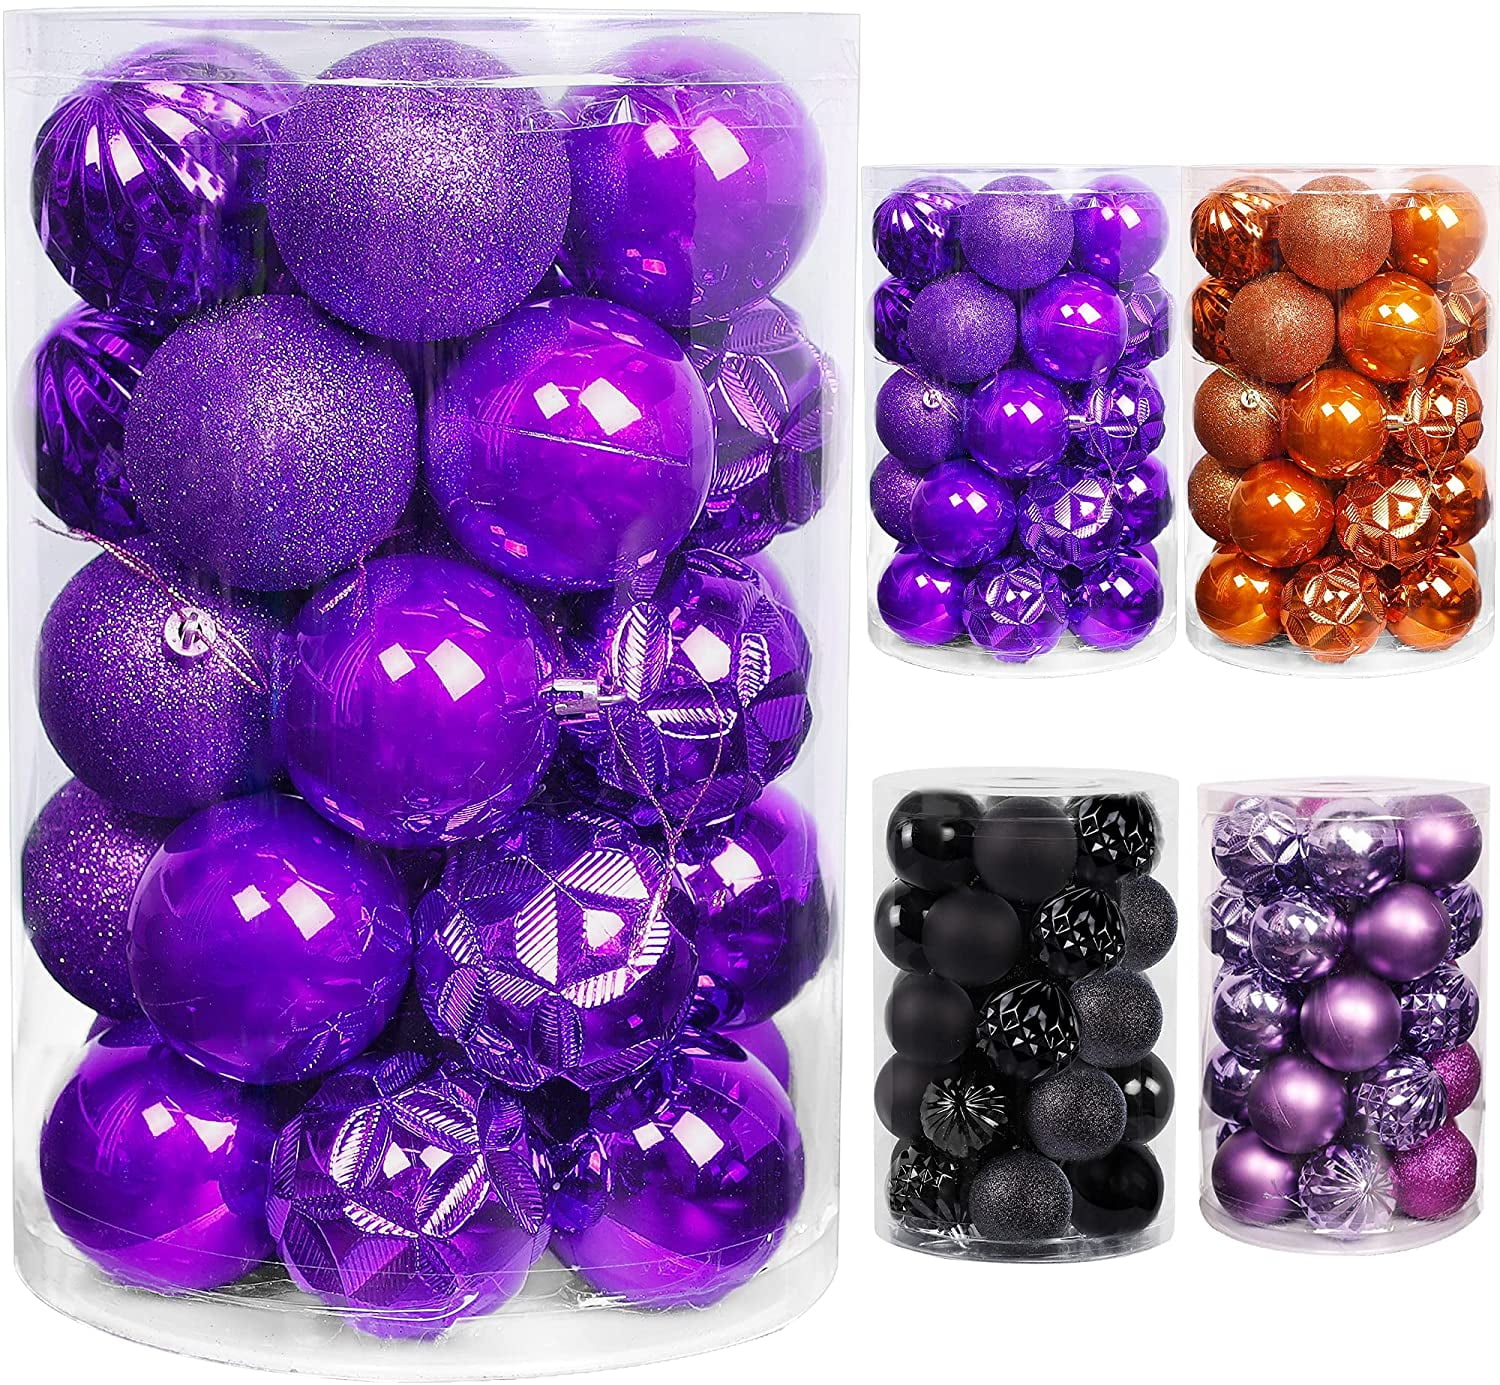 Shatterproof Barrel Packed Balls for Holiday Halloween Party Wreath Tabletop Tree Decorations 34 Count Pre-Strung Plastic Balls Dark Purple Lulu Home Halloween Hanging Ornaments 2.36 Inch 